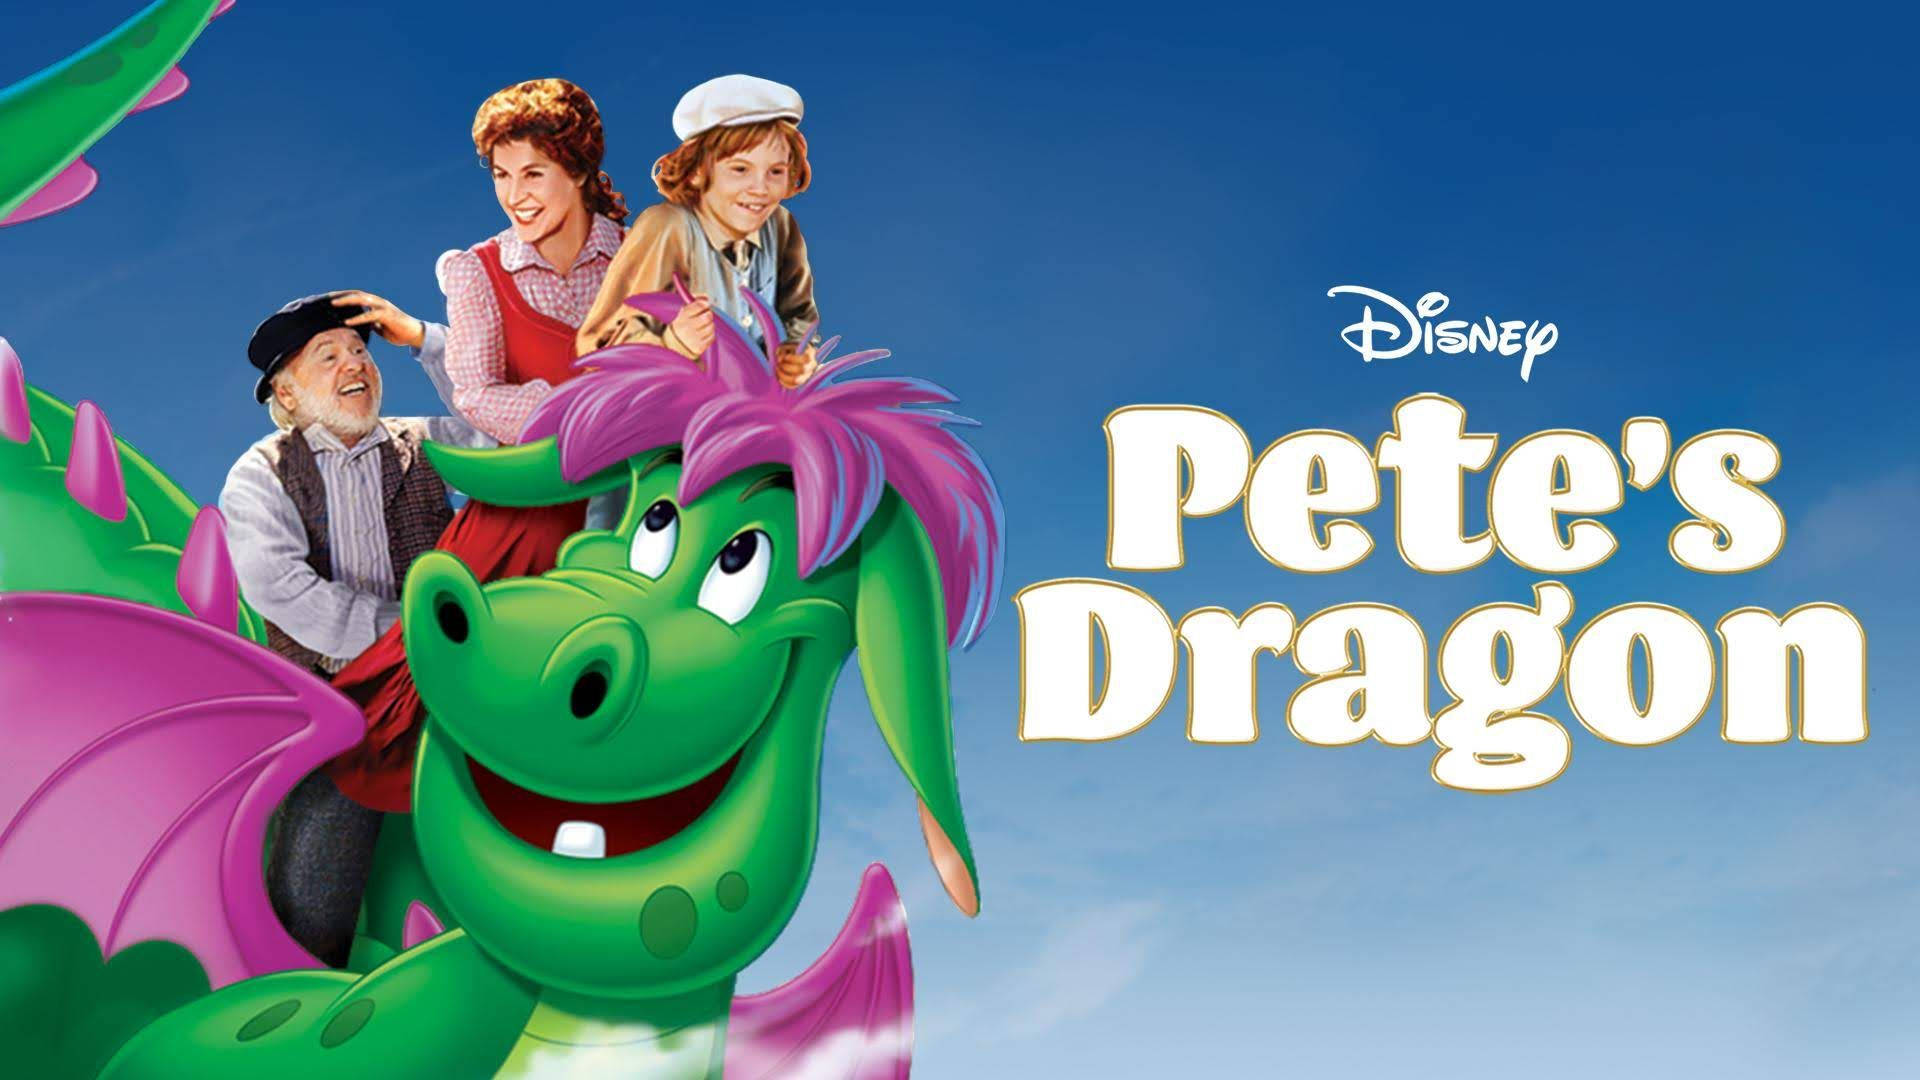 Flying Pete's Dragon And Friends Wallpaper